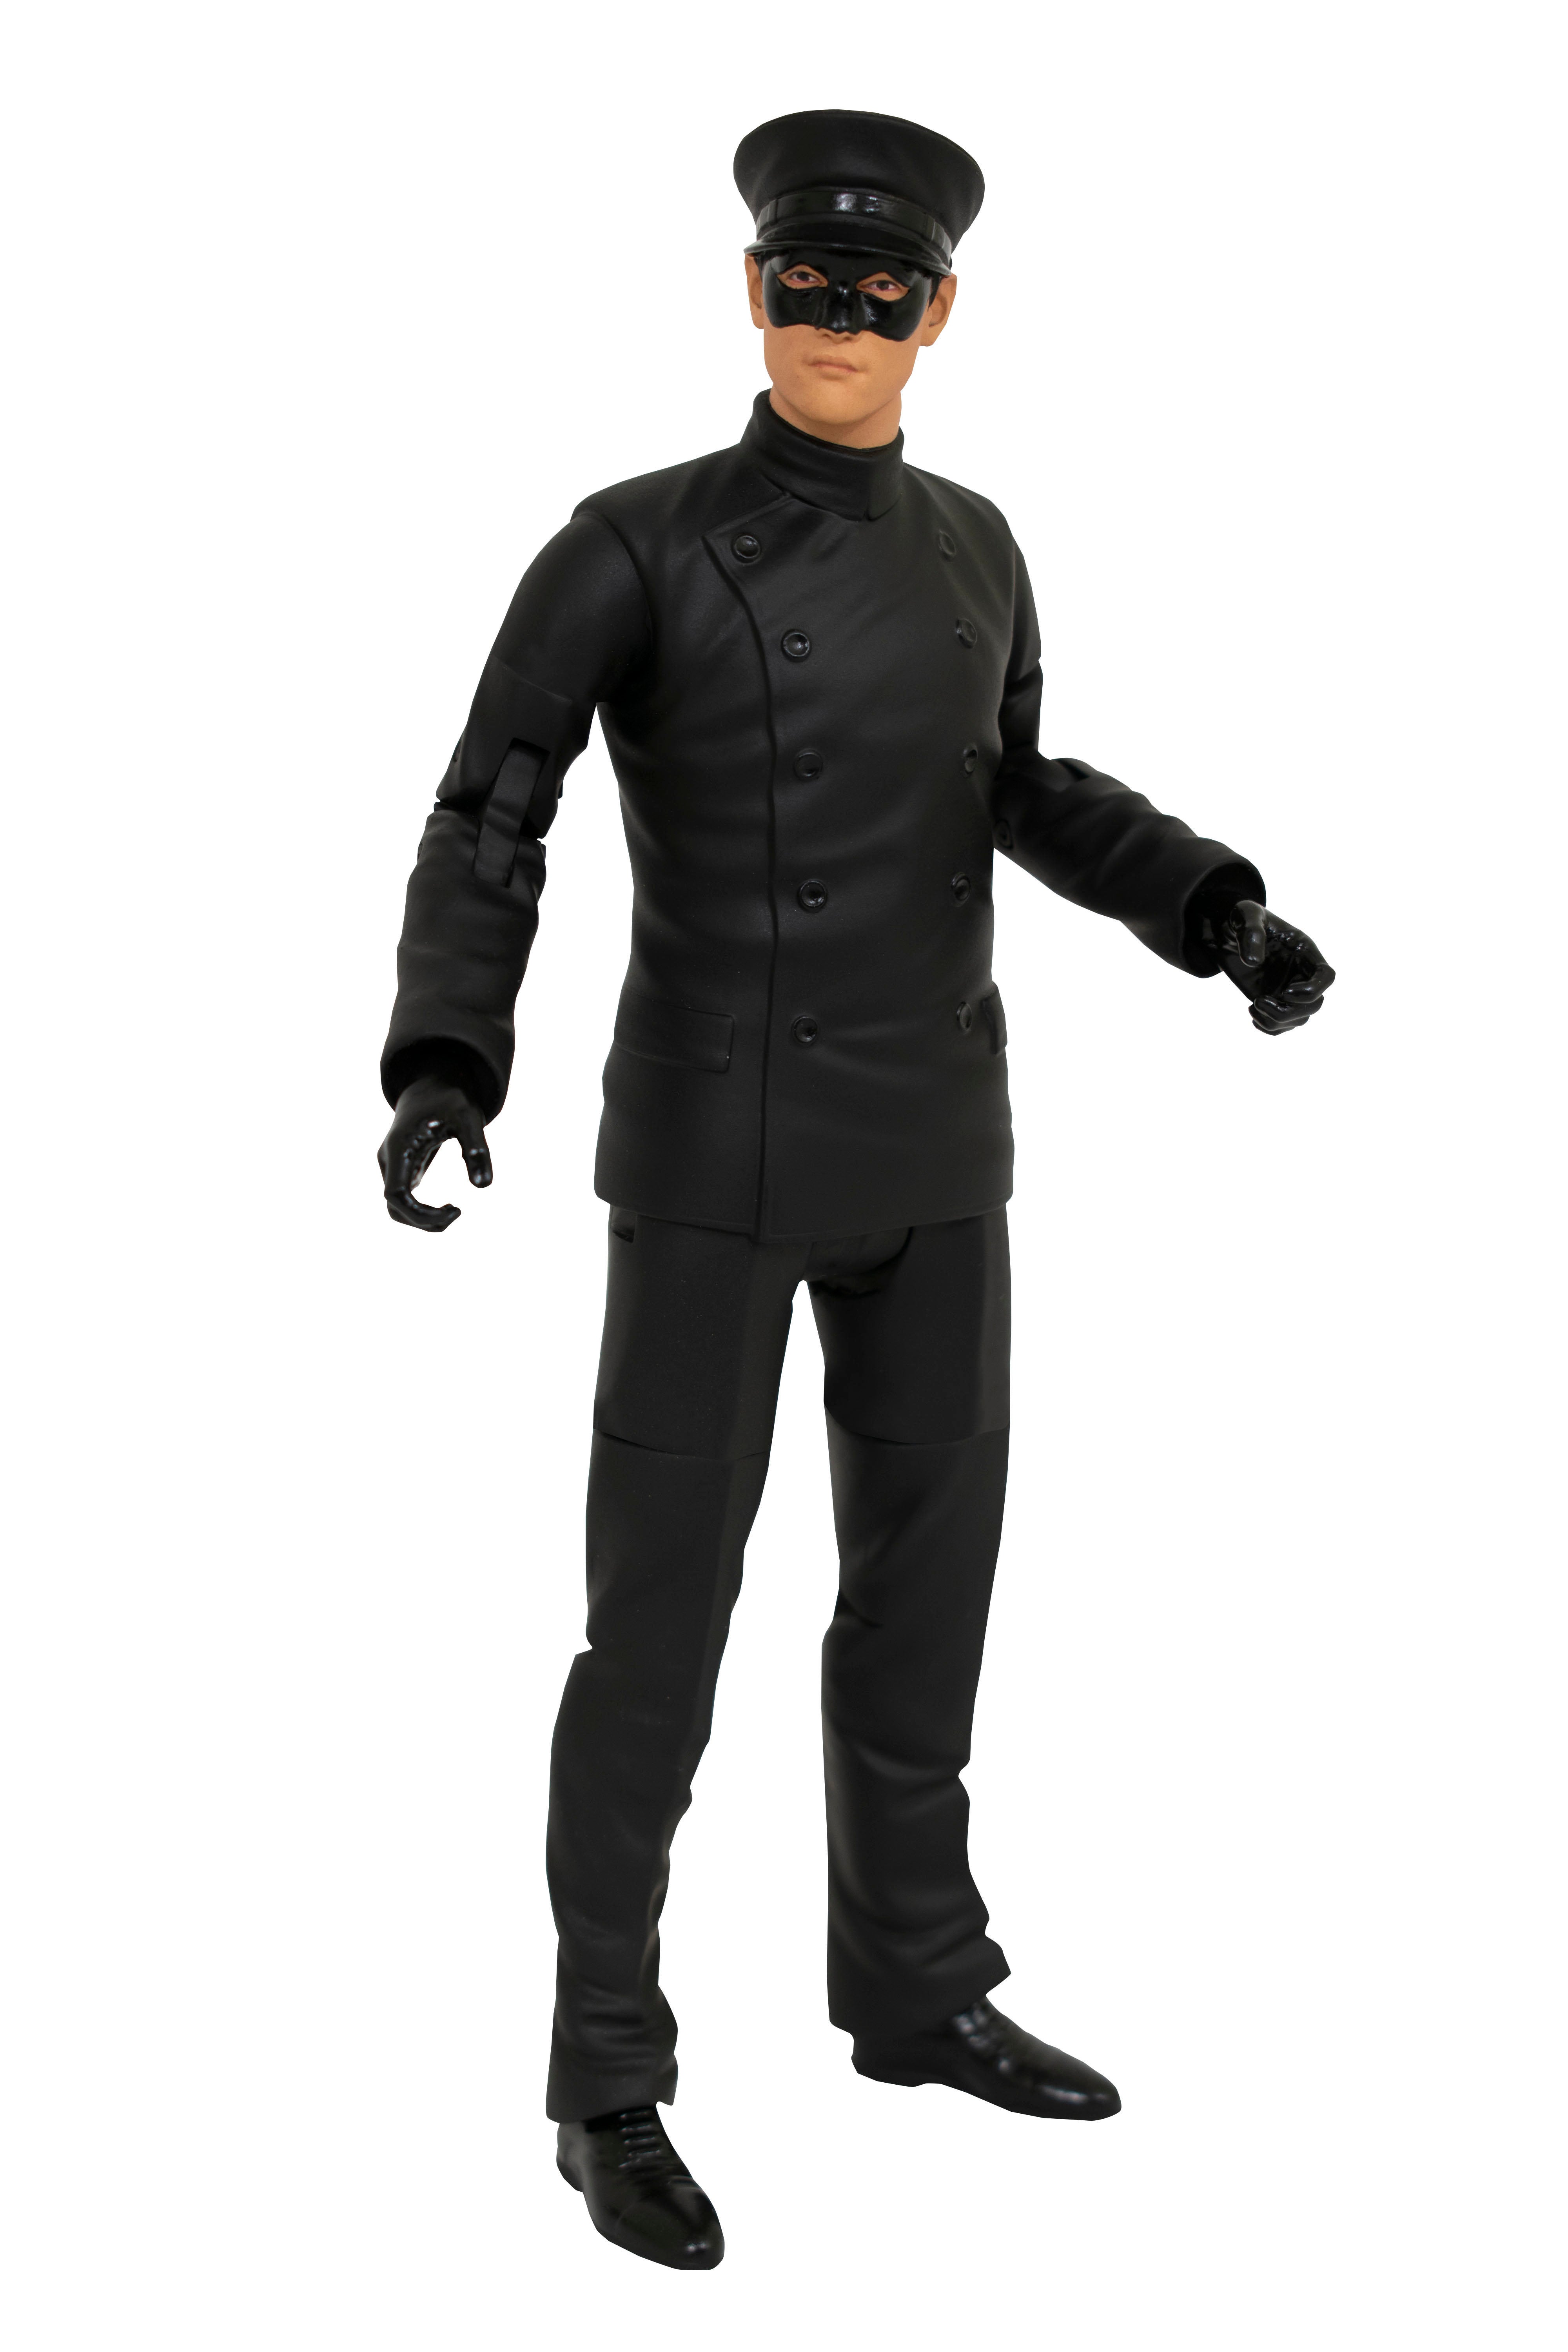 Green Hornet: Kato Action Figure Coming from Diamond Select